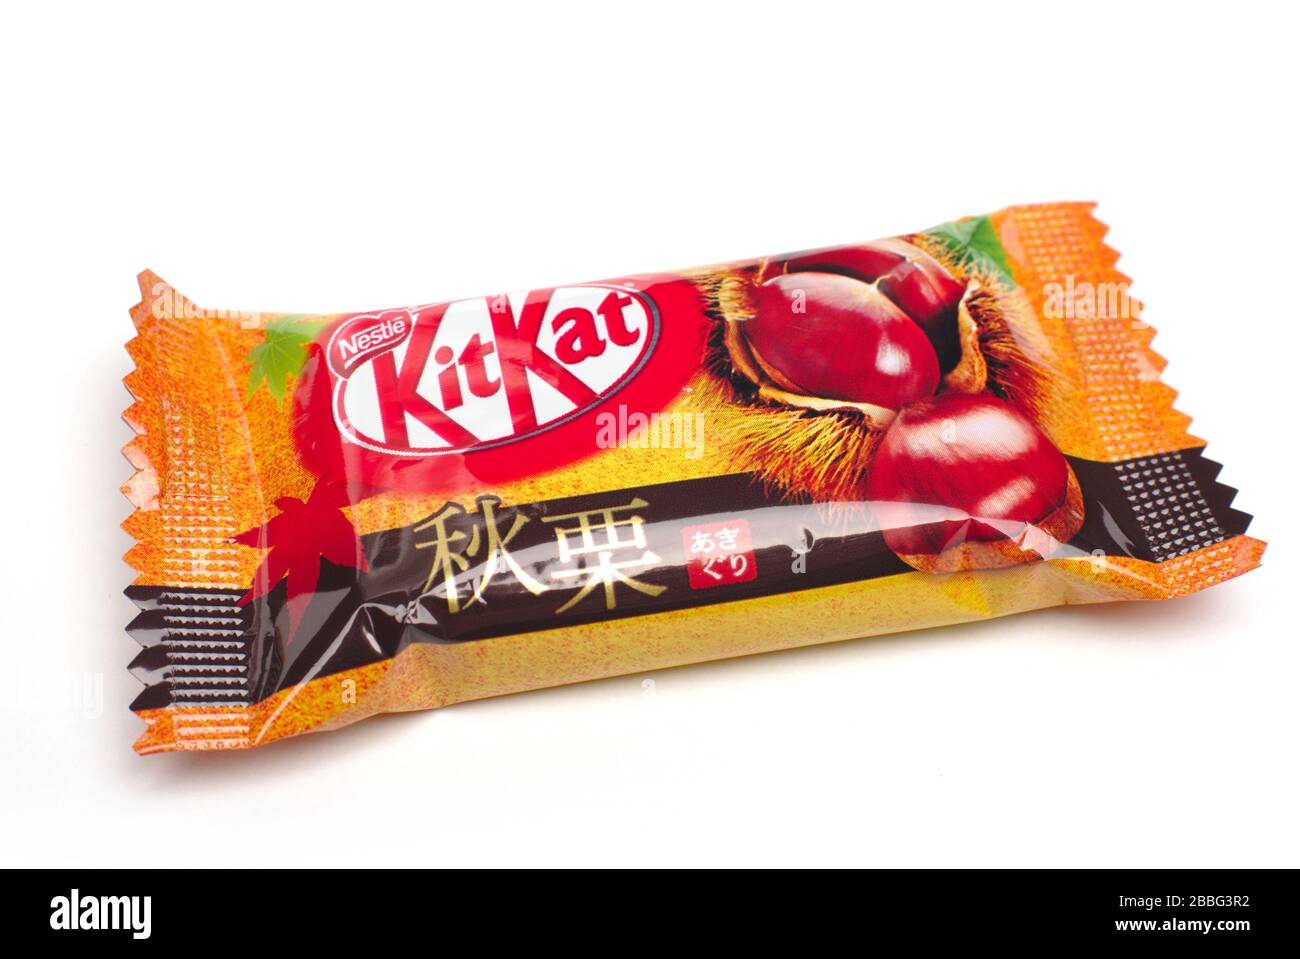 Sweet Chestnut flavour KitKat from Japan Stock Photo